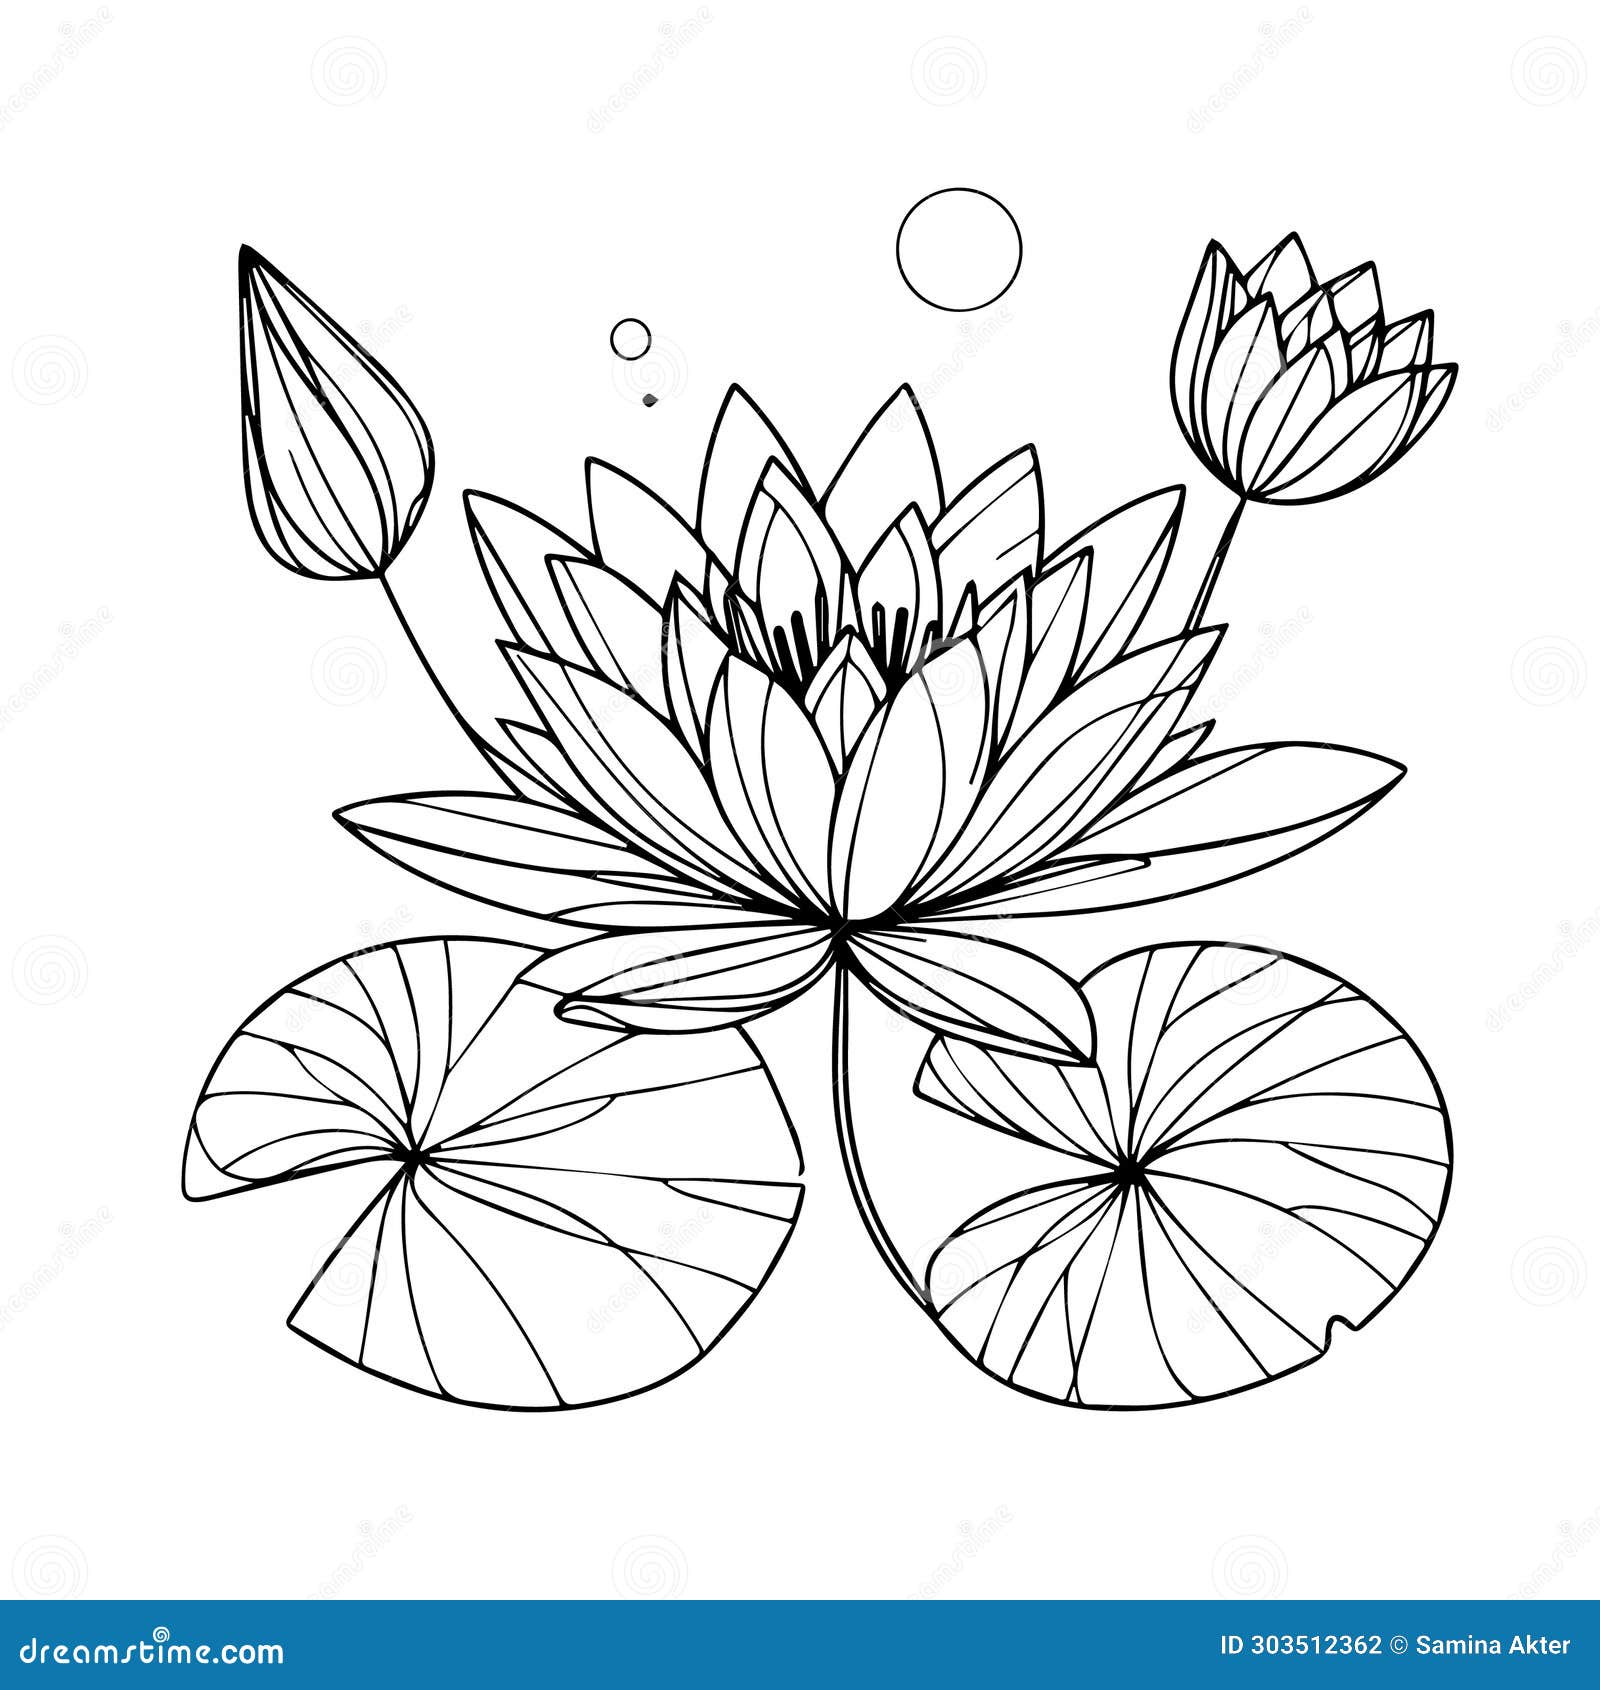 How to Draw Floral Flower Design for Beginners Step by Step Easy Drawing -  YouTube